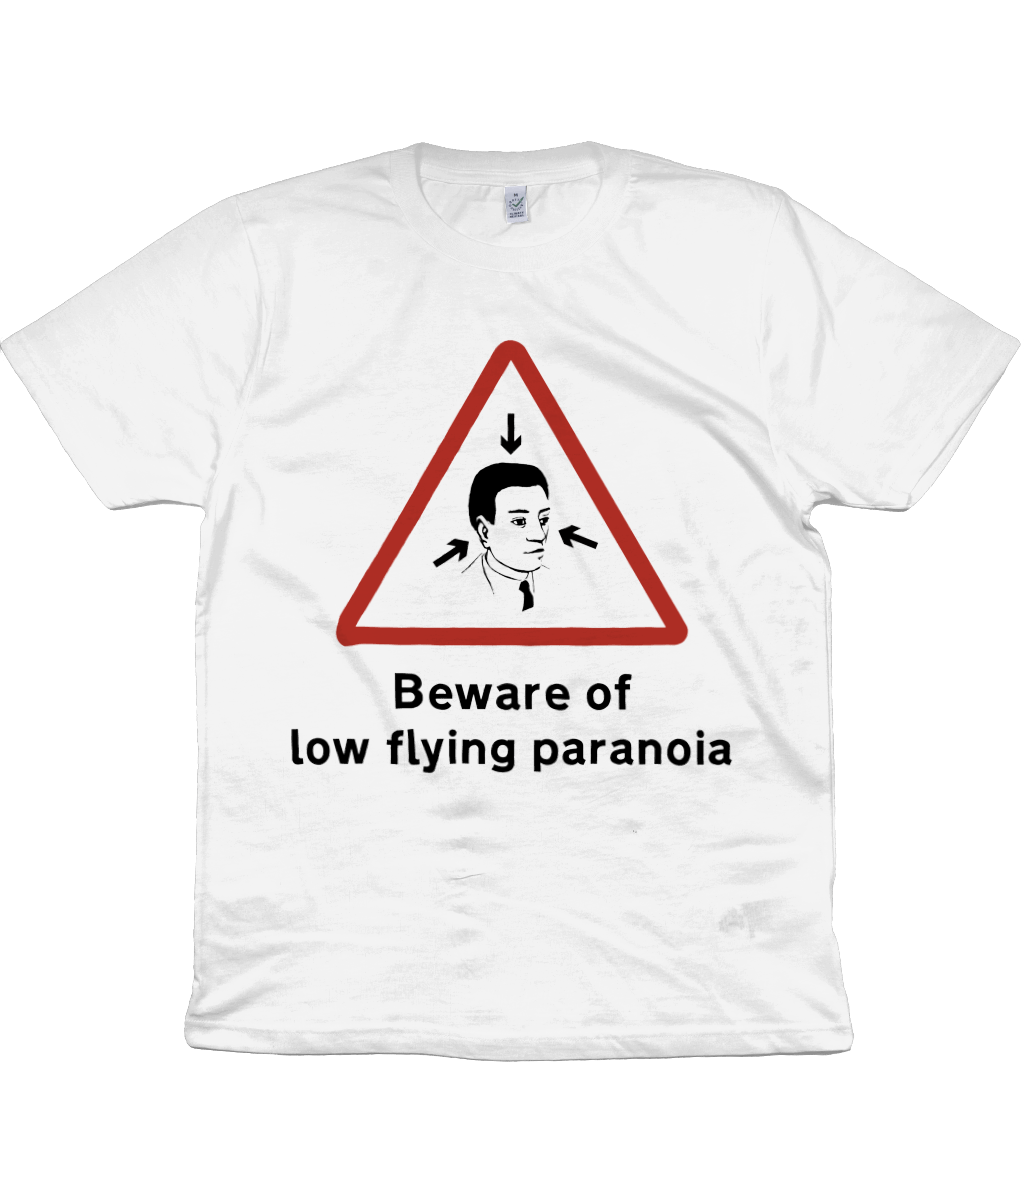 Beware of low flying paranoia